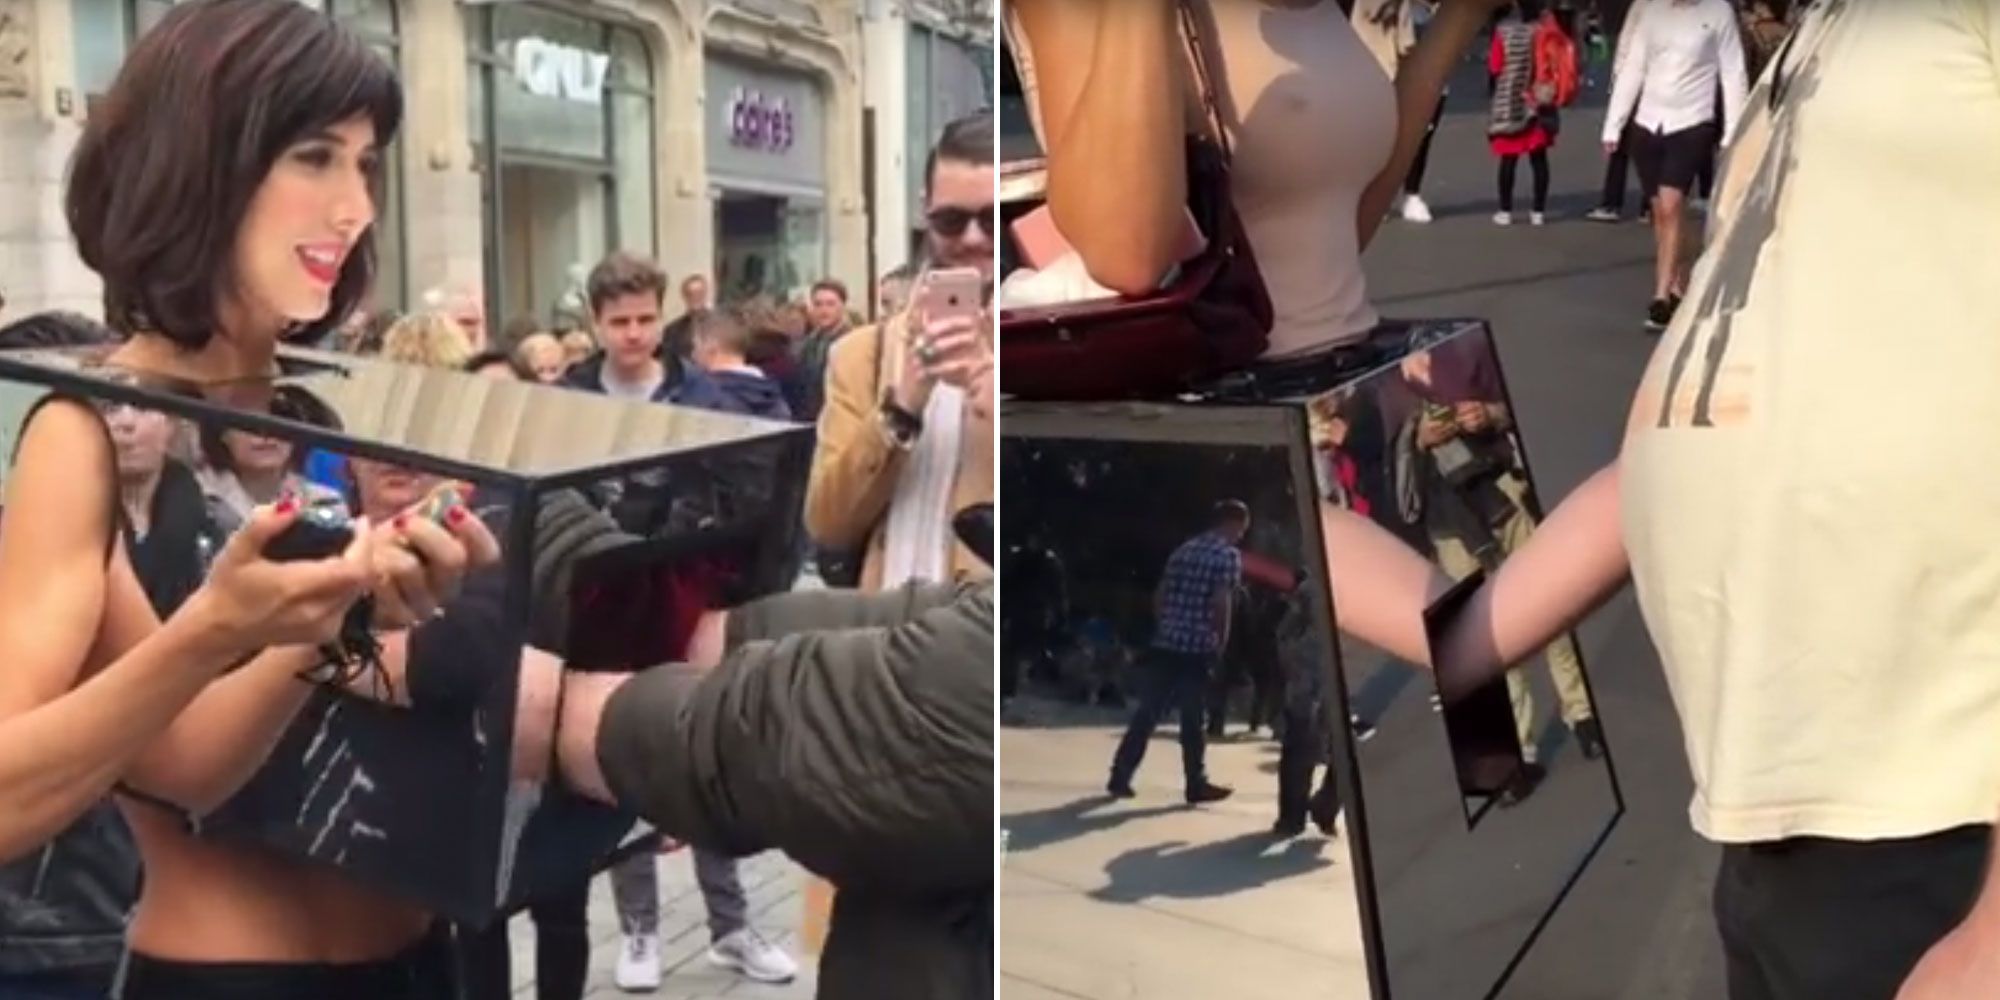 Cute Black Girls Fingering Pussy - Artist Milo Moire Let People Touch Her Vagina in Public - Mirror Box  Interview With Milo Moire